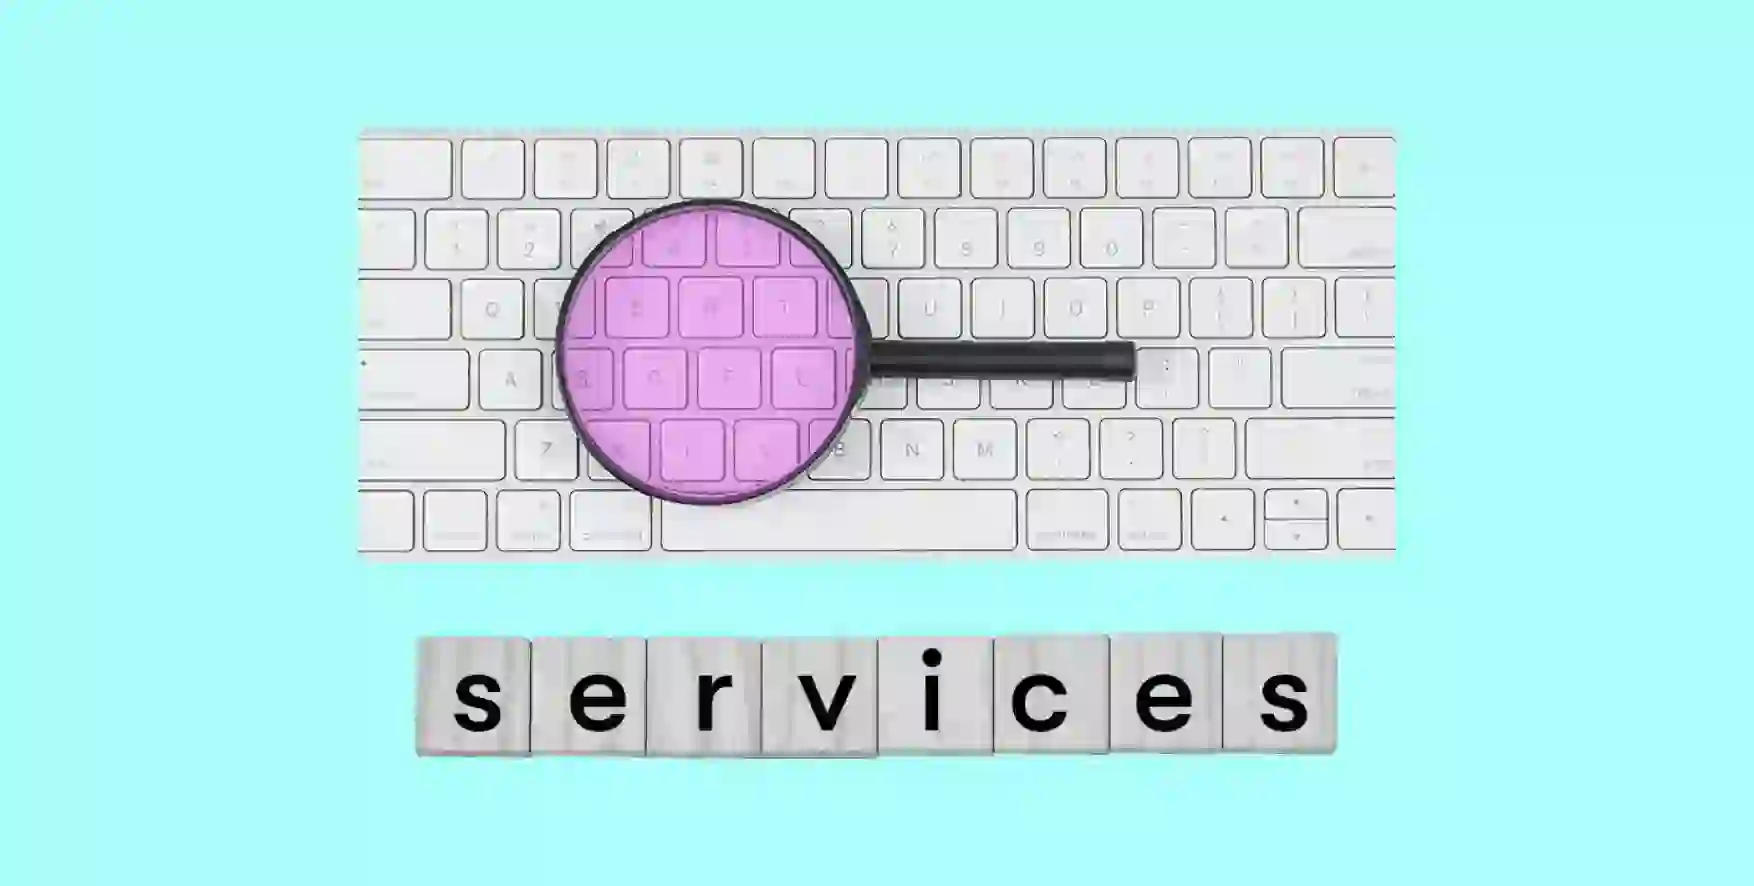 a magnifying glass lies on the keyboard, under which the word Services is written